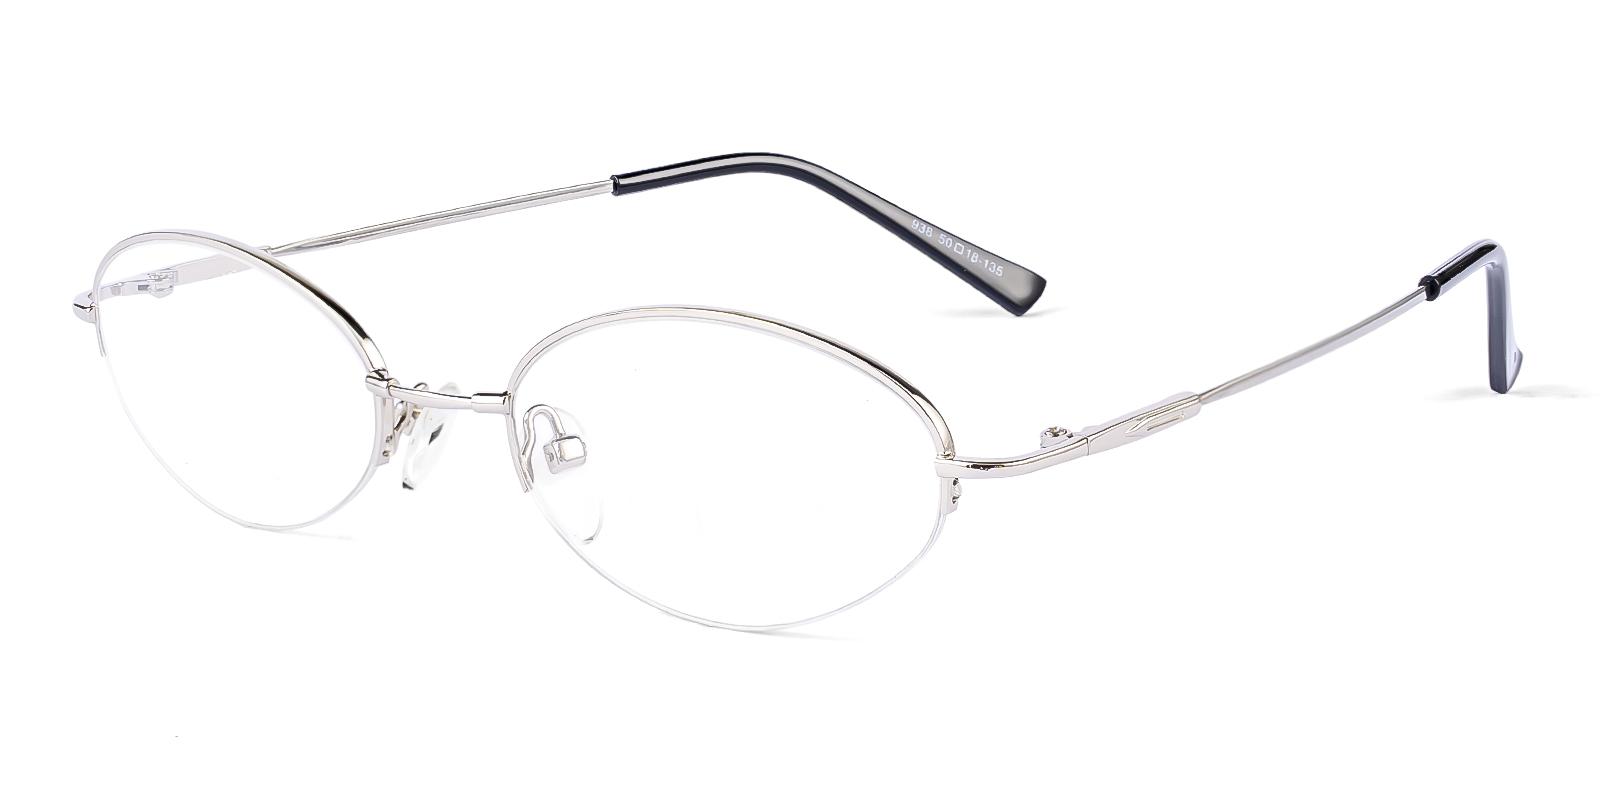 Everity Silver Metal Eyeglasses , NosePads Frames from ABBE Glasses